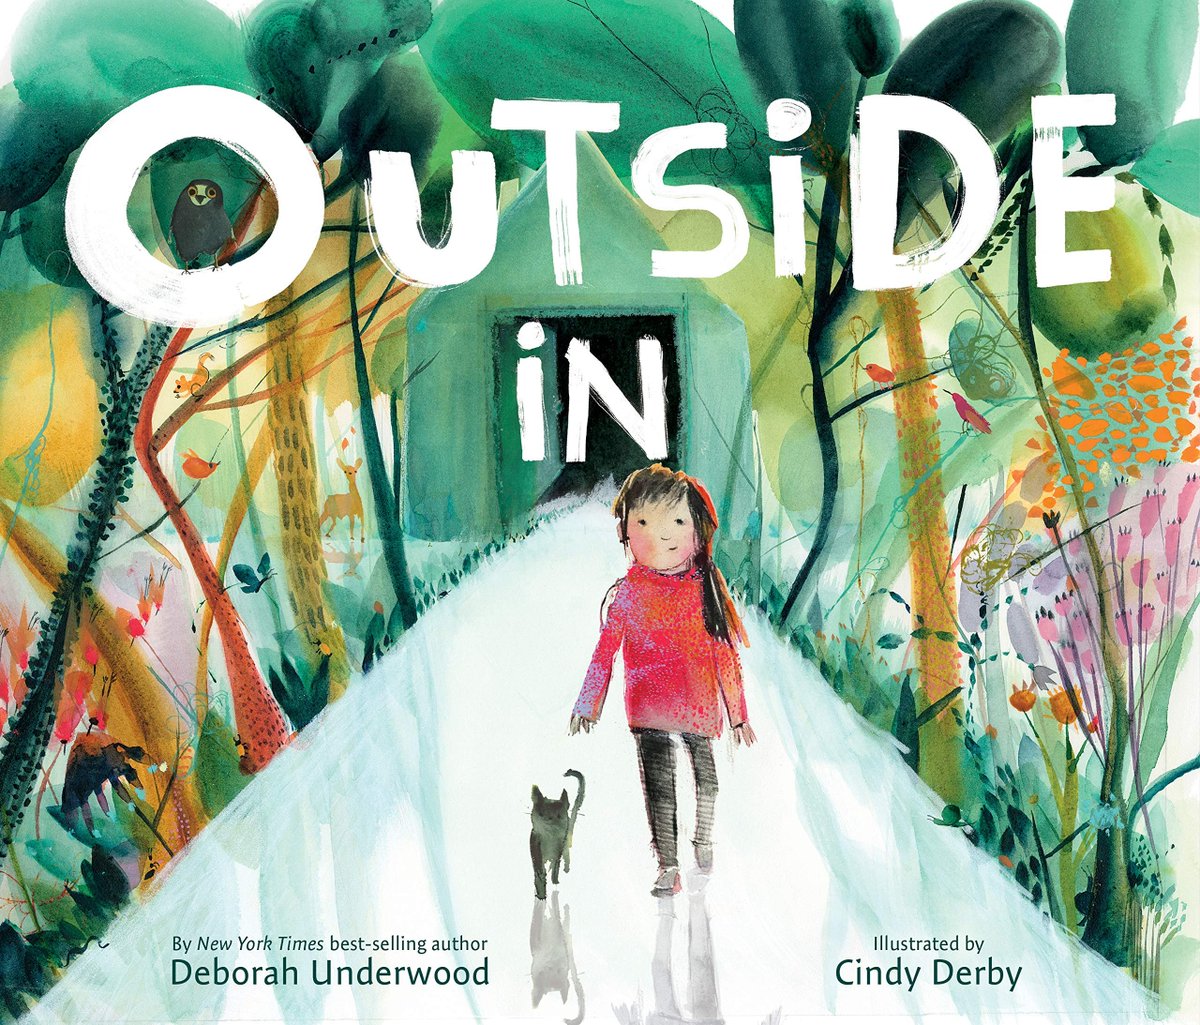 For  #IndieBookstorePreorderWeek, I recommend preordering OUTSIDE IN by  @underwoodwriter &  @CindyDerby from  @BlueWillowBooks in Houston, TXRelease Date: 4/14/20Publisher:  @HMHKids